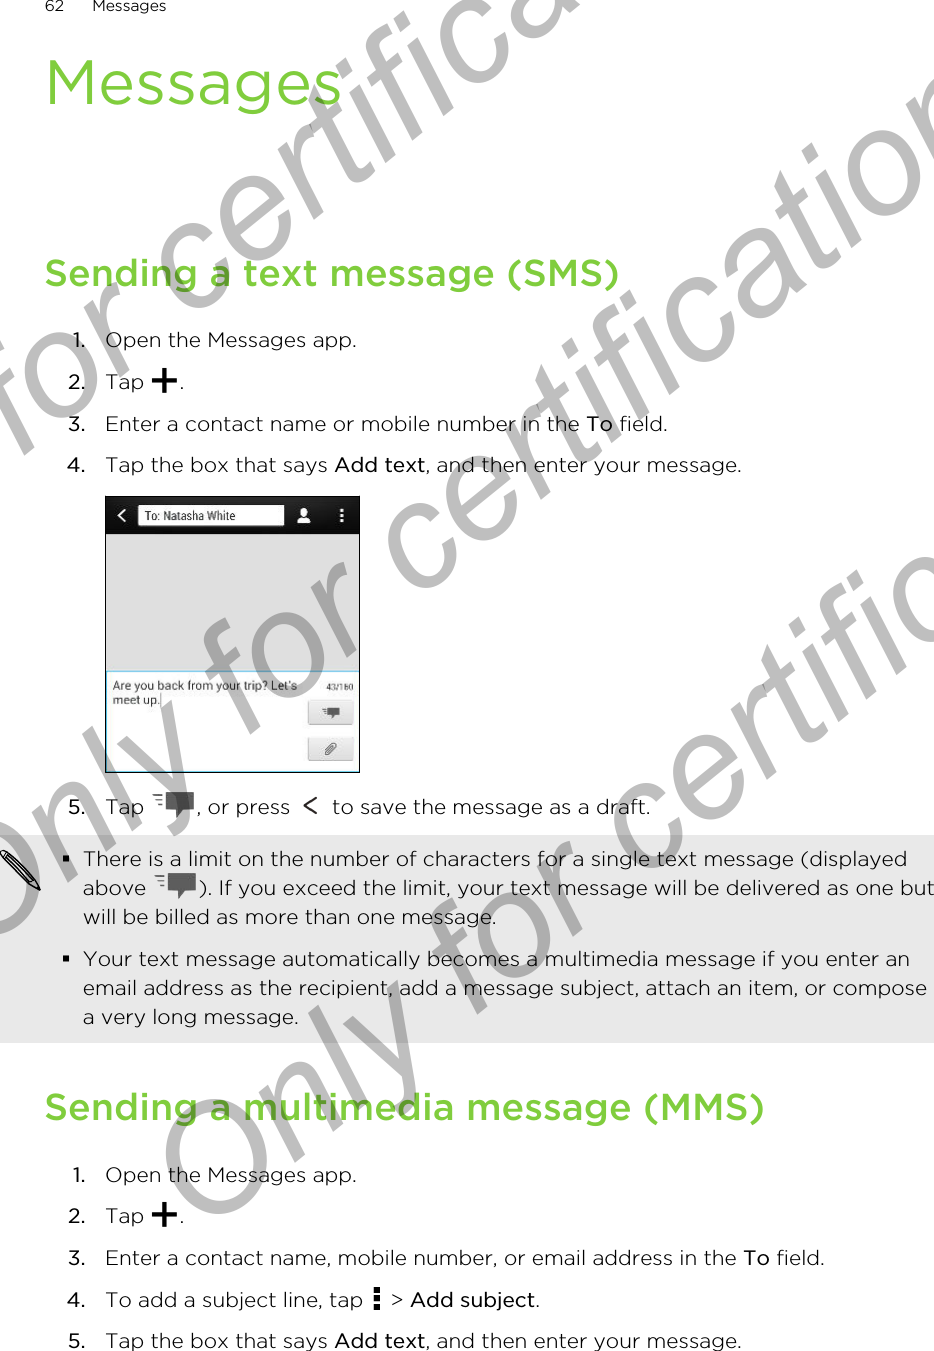 MessagesSending a text message (SMS)1. Open the Messages app.2. Tap  .3. Enter a contact name or mobile number in the To field.4. Tap the box that says Add text, and then enter your message. 5. Tap  , or press   to save the message as a draft. §There is a limit on the number of characters for a single text message (displayedabove  ). If you exceed the limit, your text message will be delivered as one butwill be billed as more than one message.§Your text message automatically becomes a multimedia message if you enter anemail address as the recipient, add a message subject, attach an item, or composea very long message.Sending a multimedia message (MMS)1. Open the Messages app.2. Tap  .3. Enter a contact name, mobile number, or email address in the To field.4. To add a subject line, tap   &gt; Add subject.5. Tap the box that says Add text, and then enter your message.62 MessagesOnly for certification  Only for certification  Only for certification